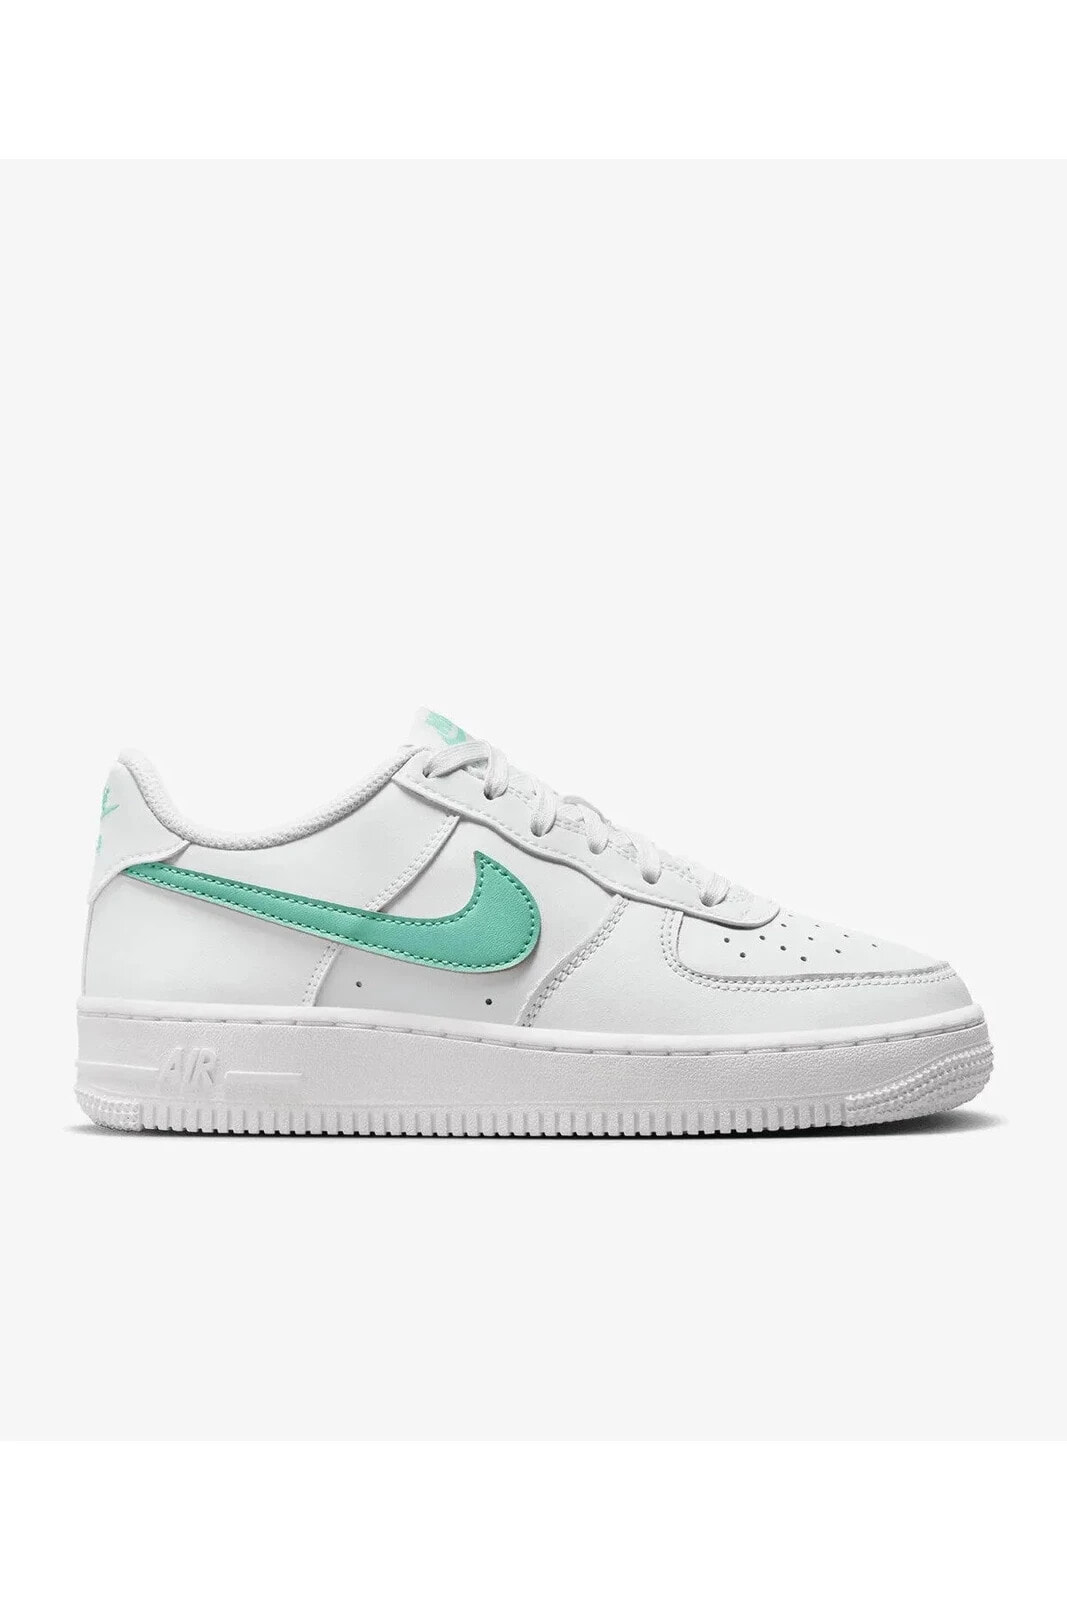 Air Force 1 White Emerald Rise Unisex Sneaker